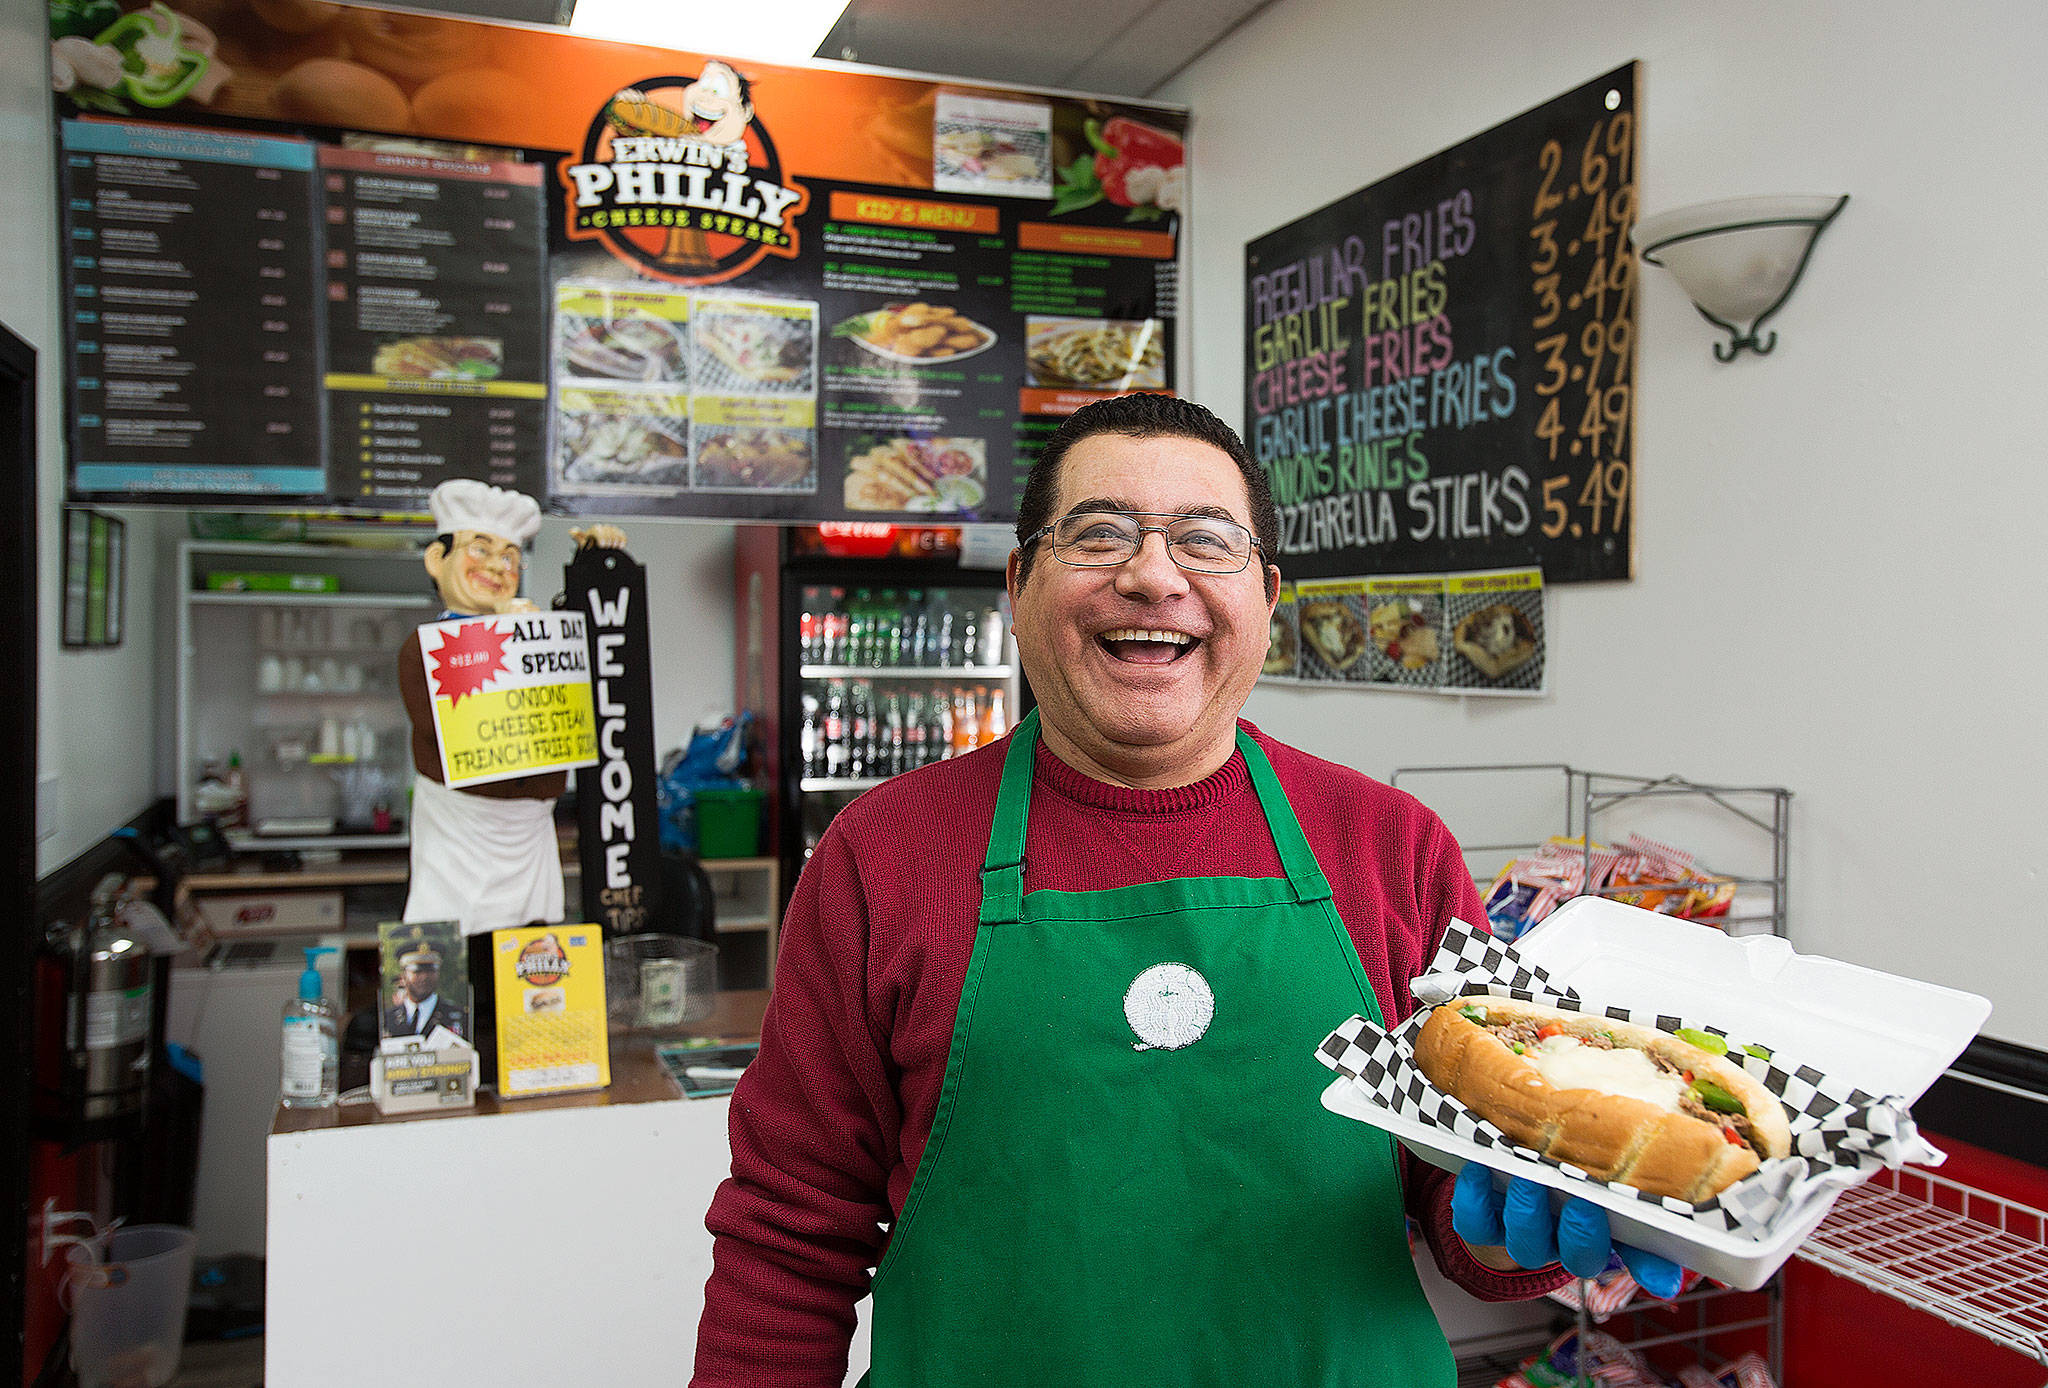 Erwin Sanchez, owner of Erwin’s Philly Cheese Steak, holds up one of the selections from the menu at his Everett restaurant. (Andy Bronson / The Herald)